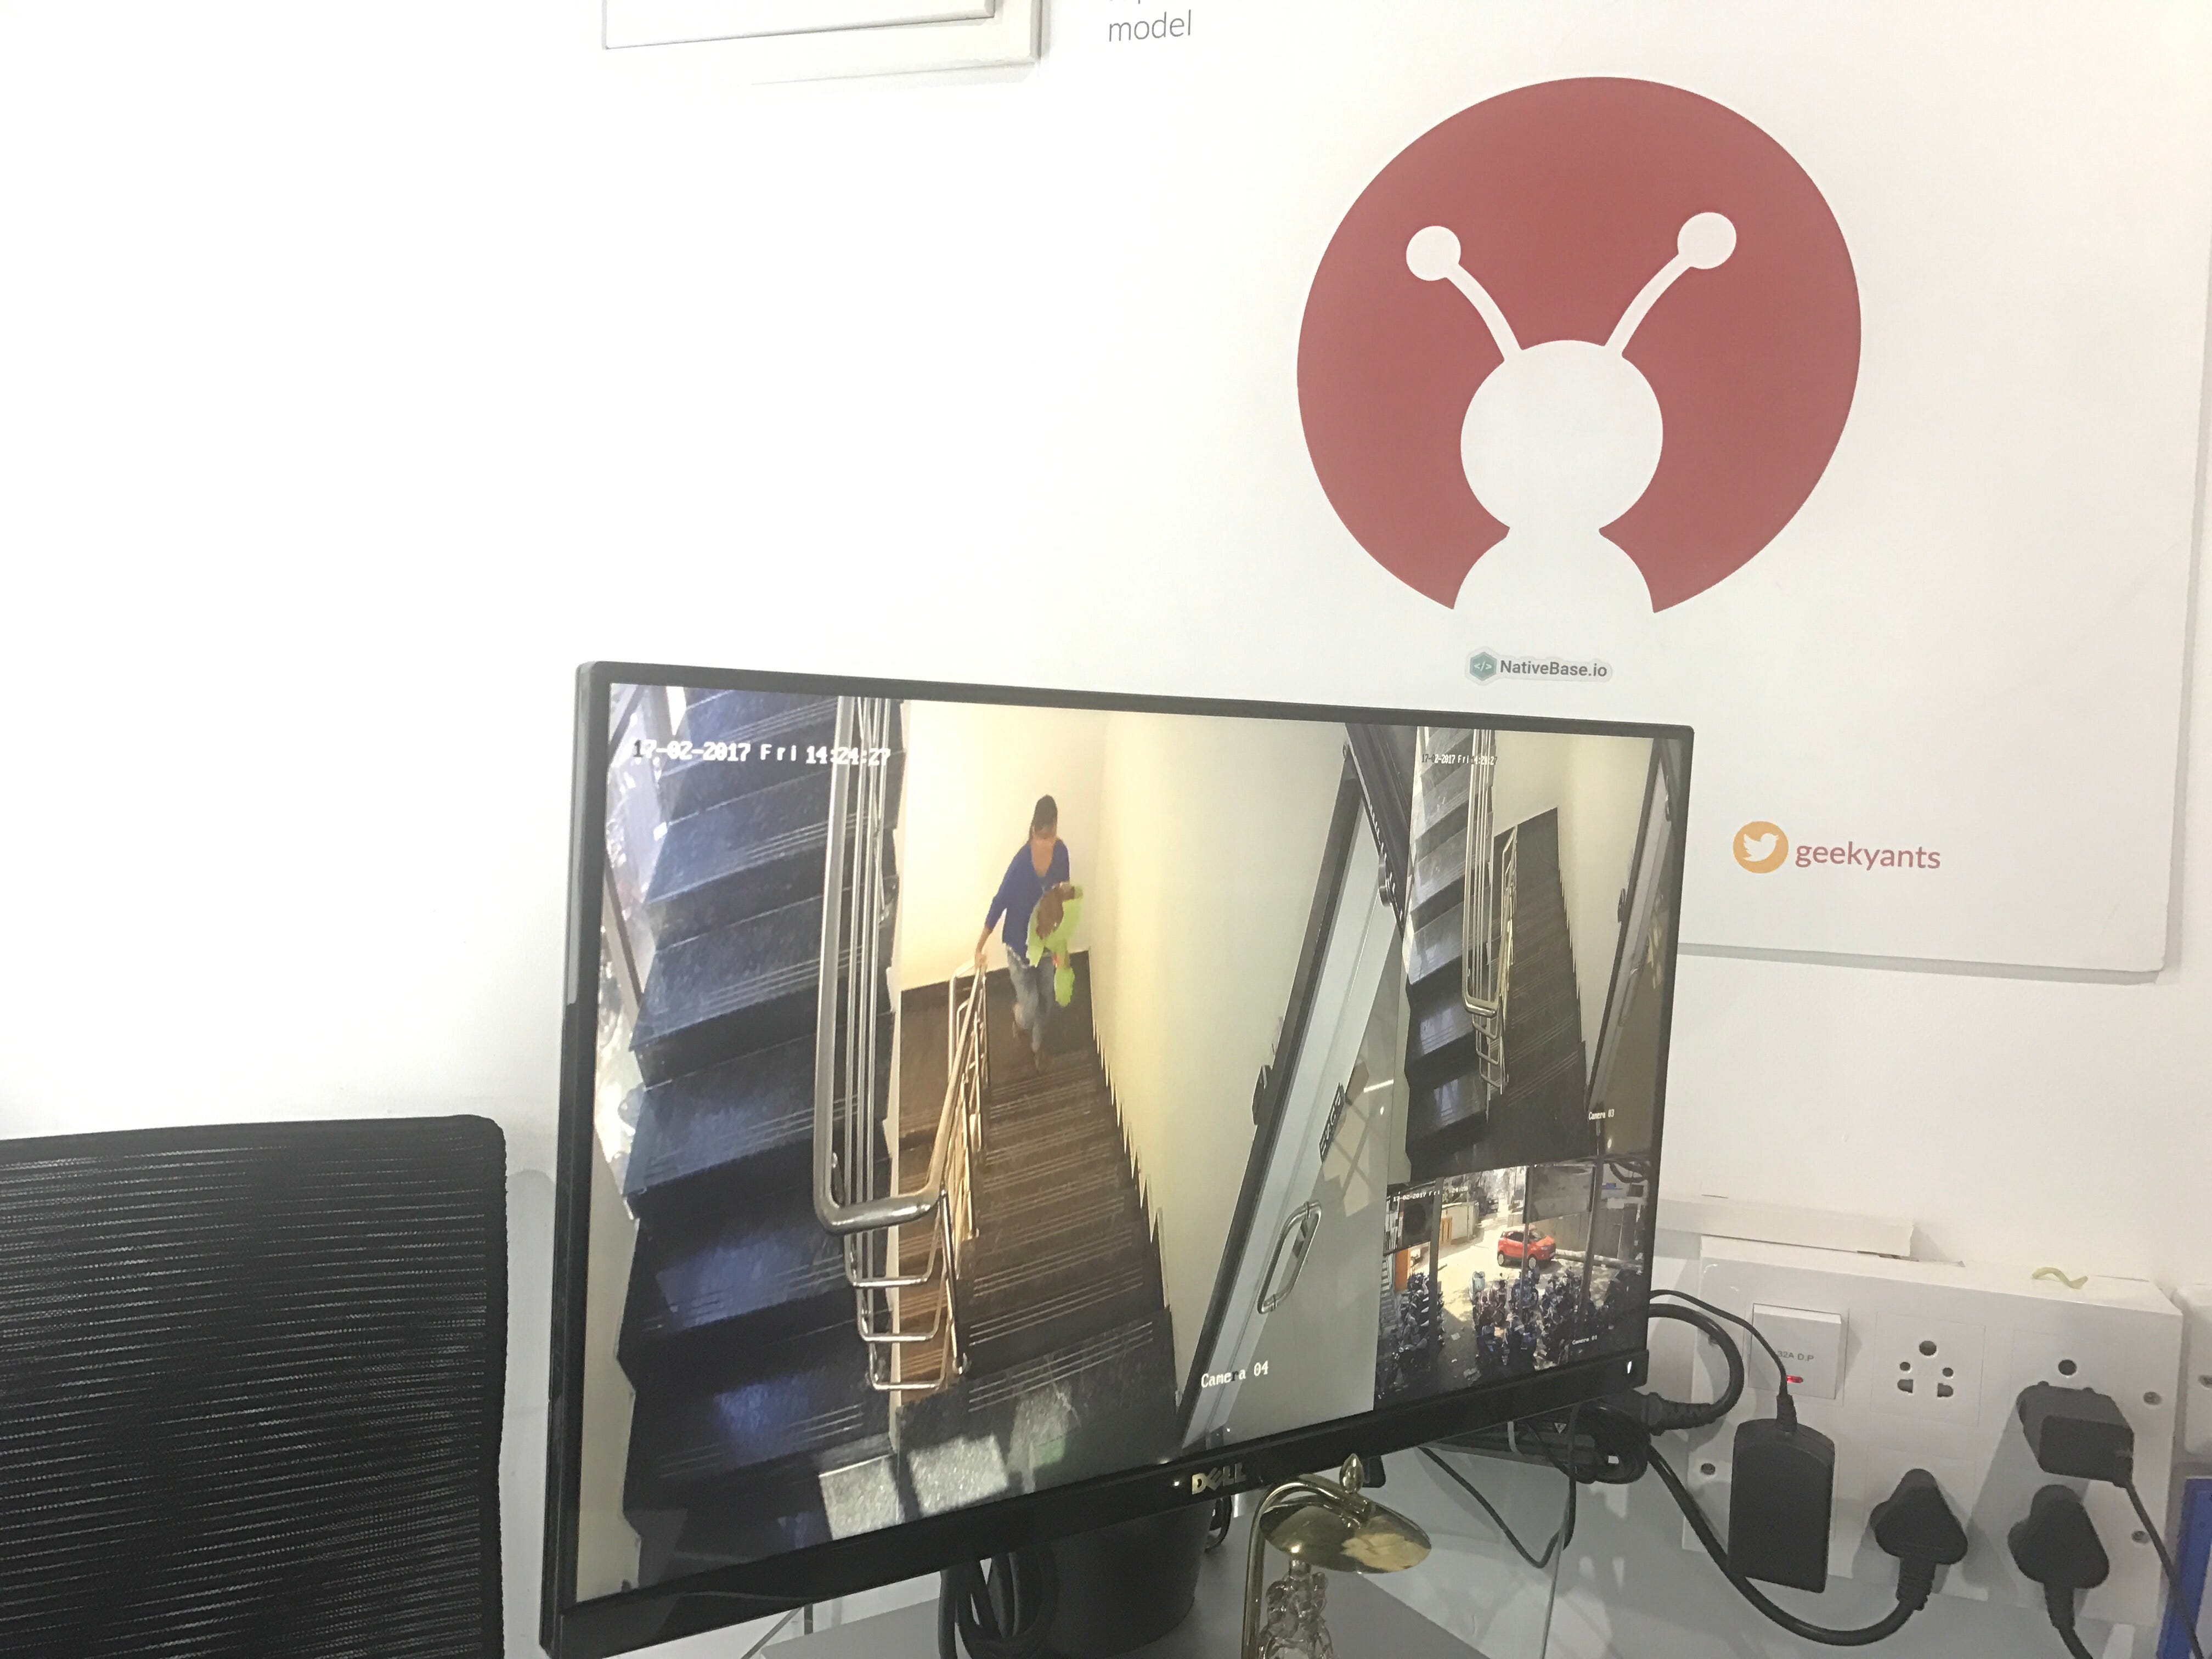 hikvision raspberry pi as viewer